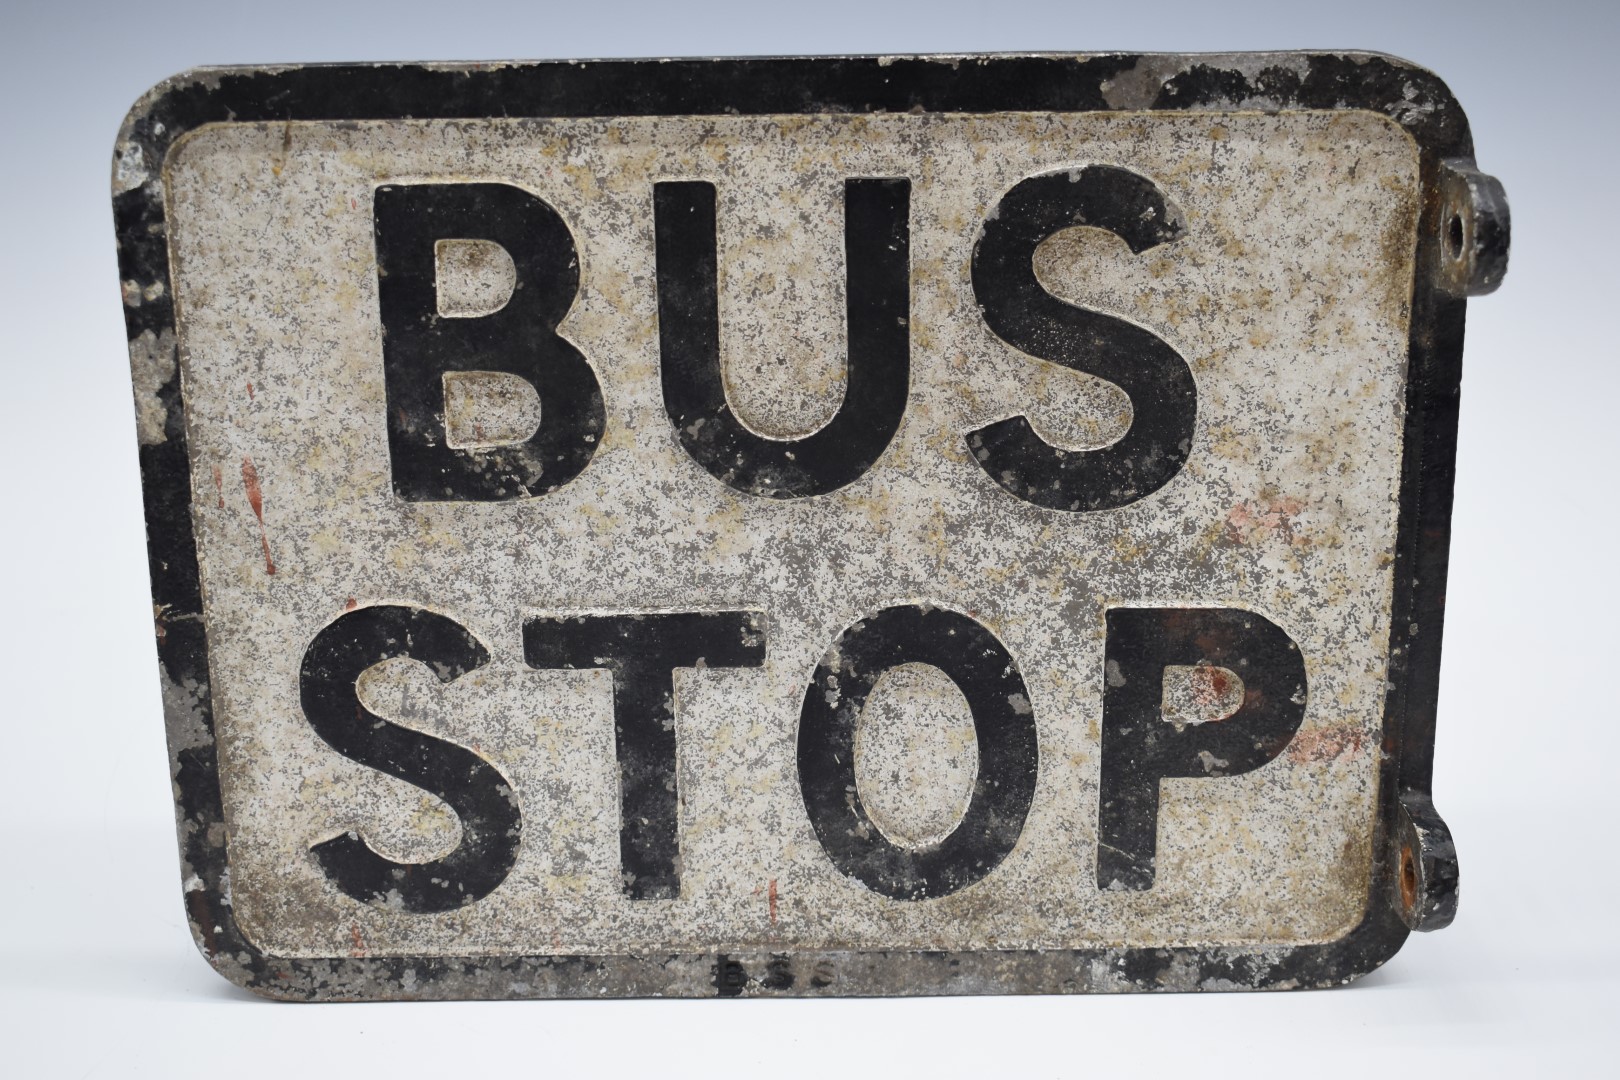 Vintage cast aluminium double sided bus stop sign by Franco Traffic Signs Ltd, model BSS1, 23 x 30. - Image 3 of 4